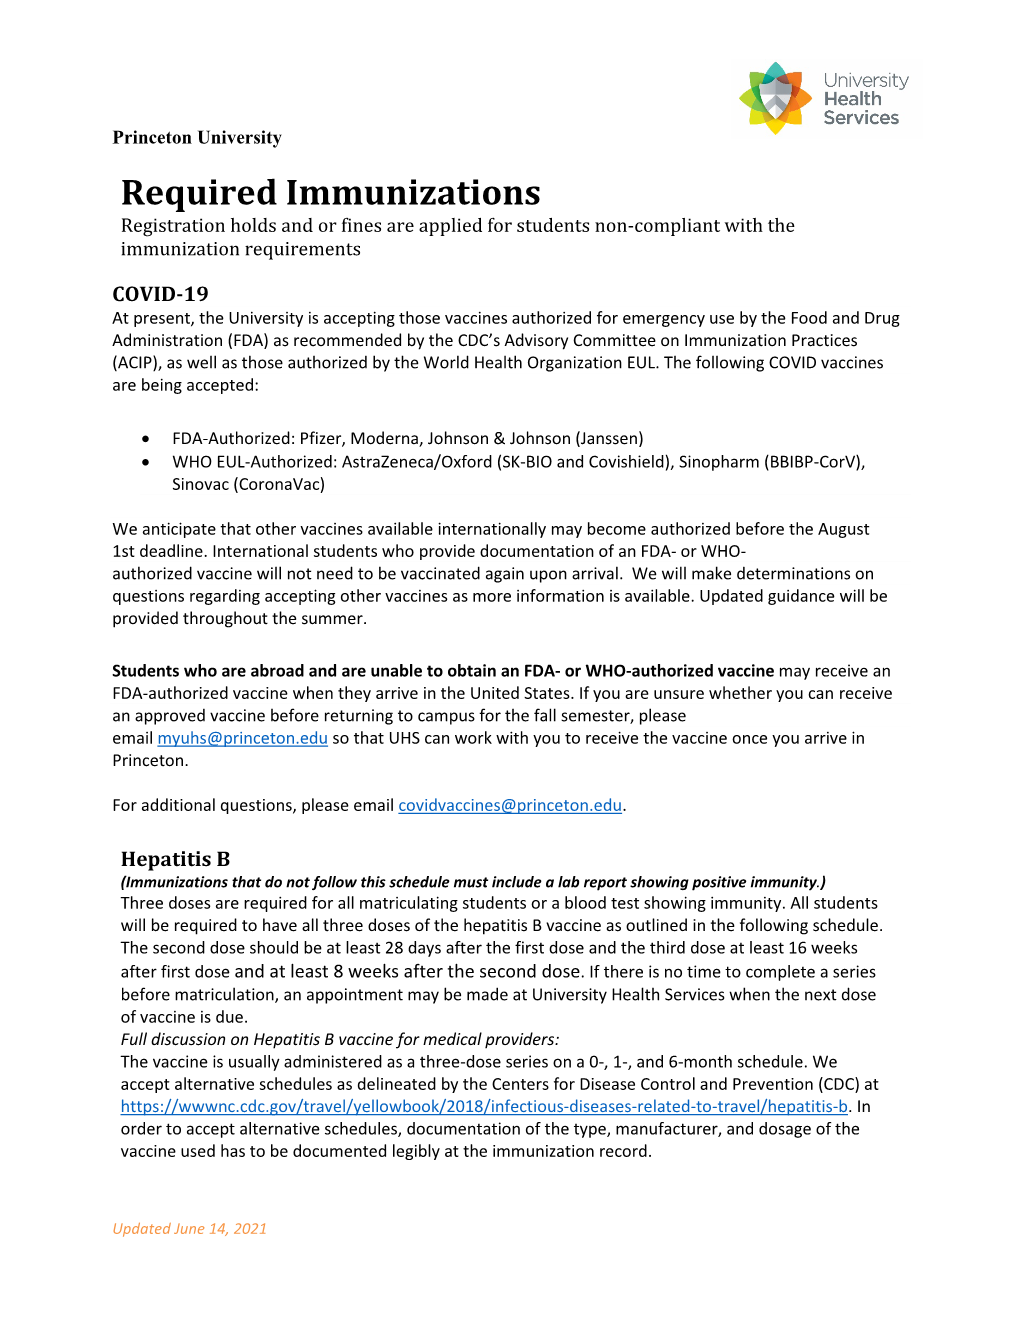 Required and Recommended Immunizations